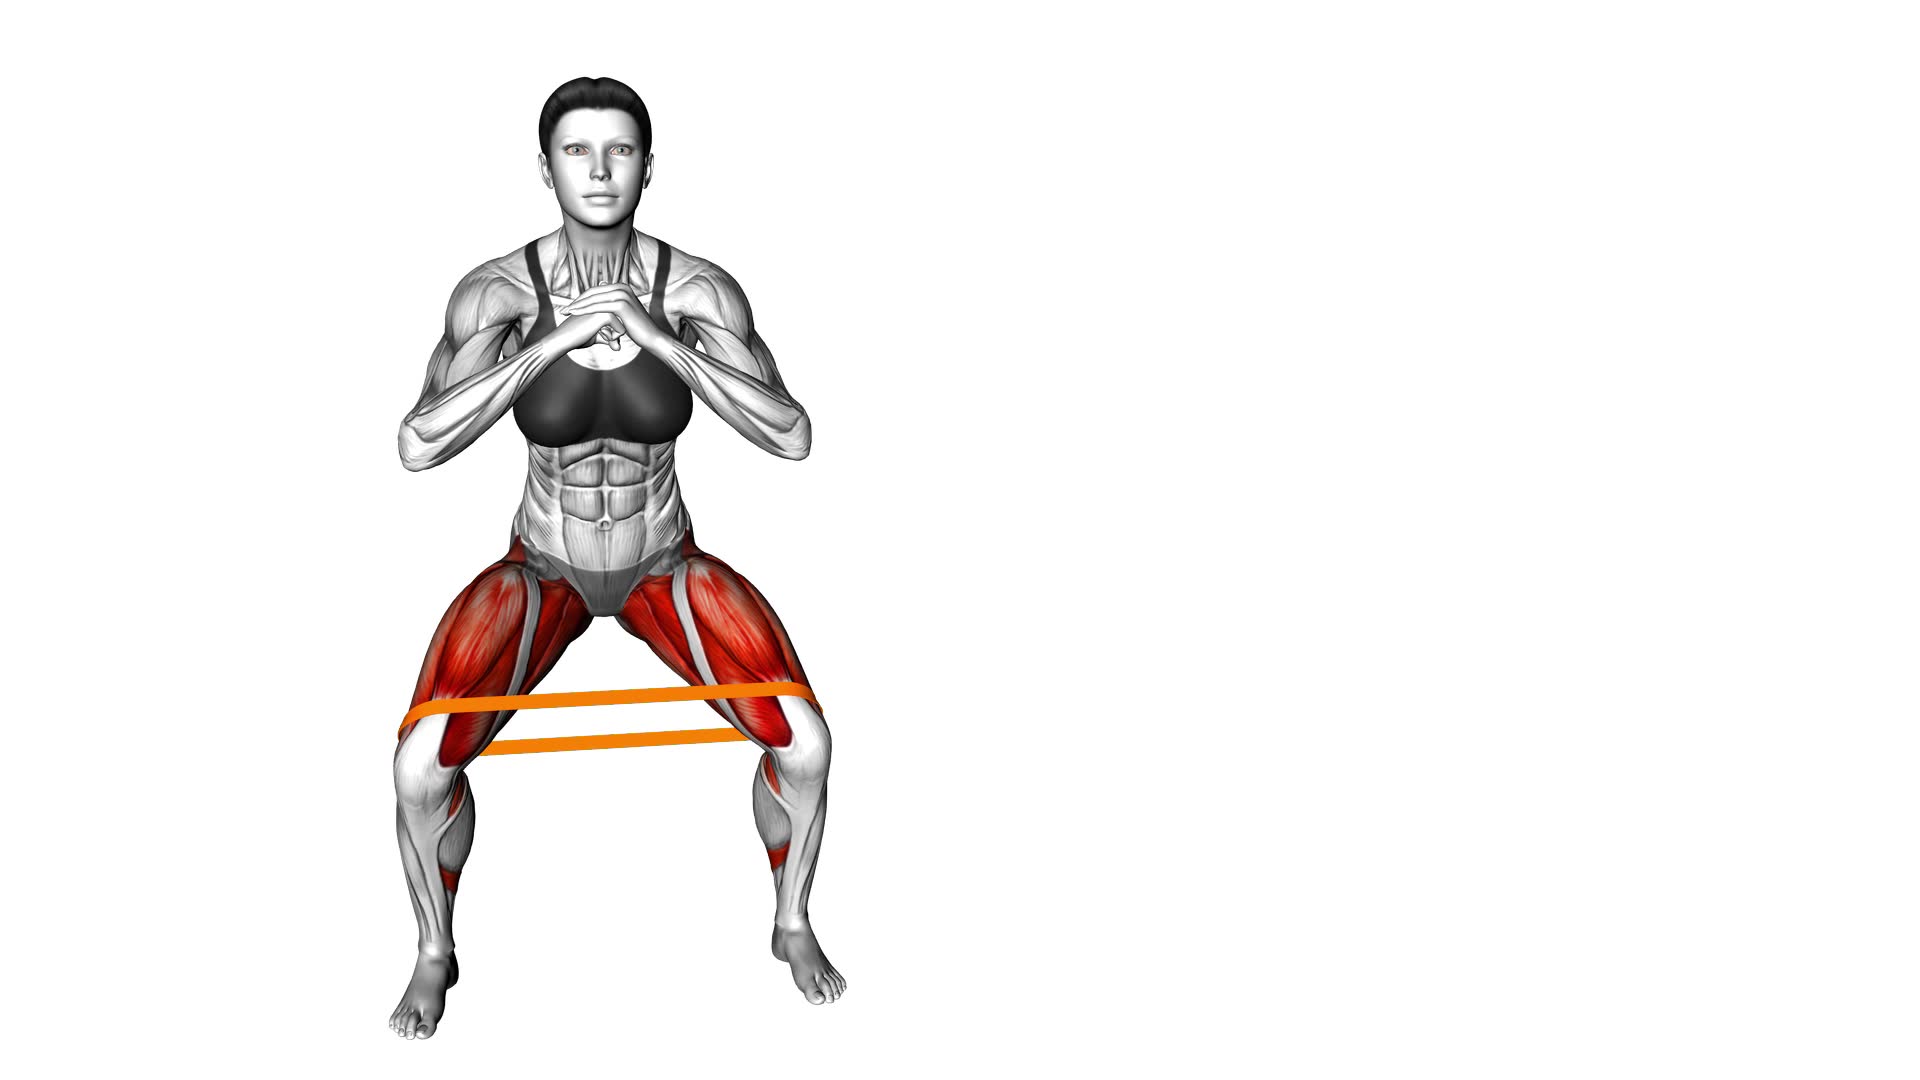 Resistance Band Side Walk Squat (female) - Video Exercise Guide & Tips